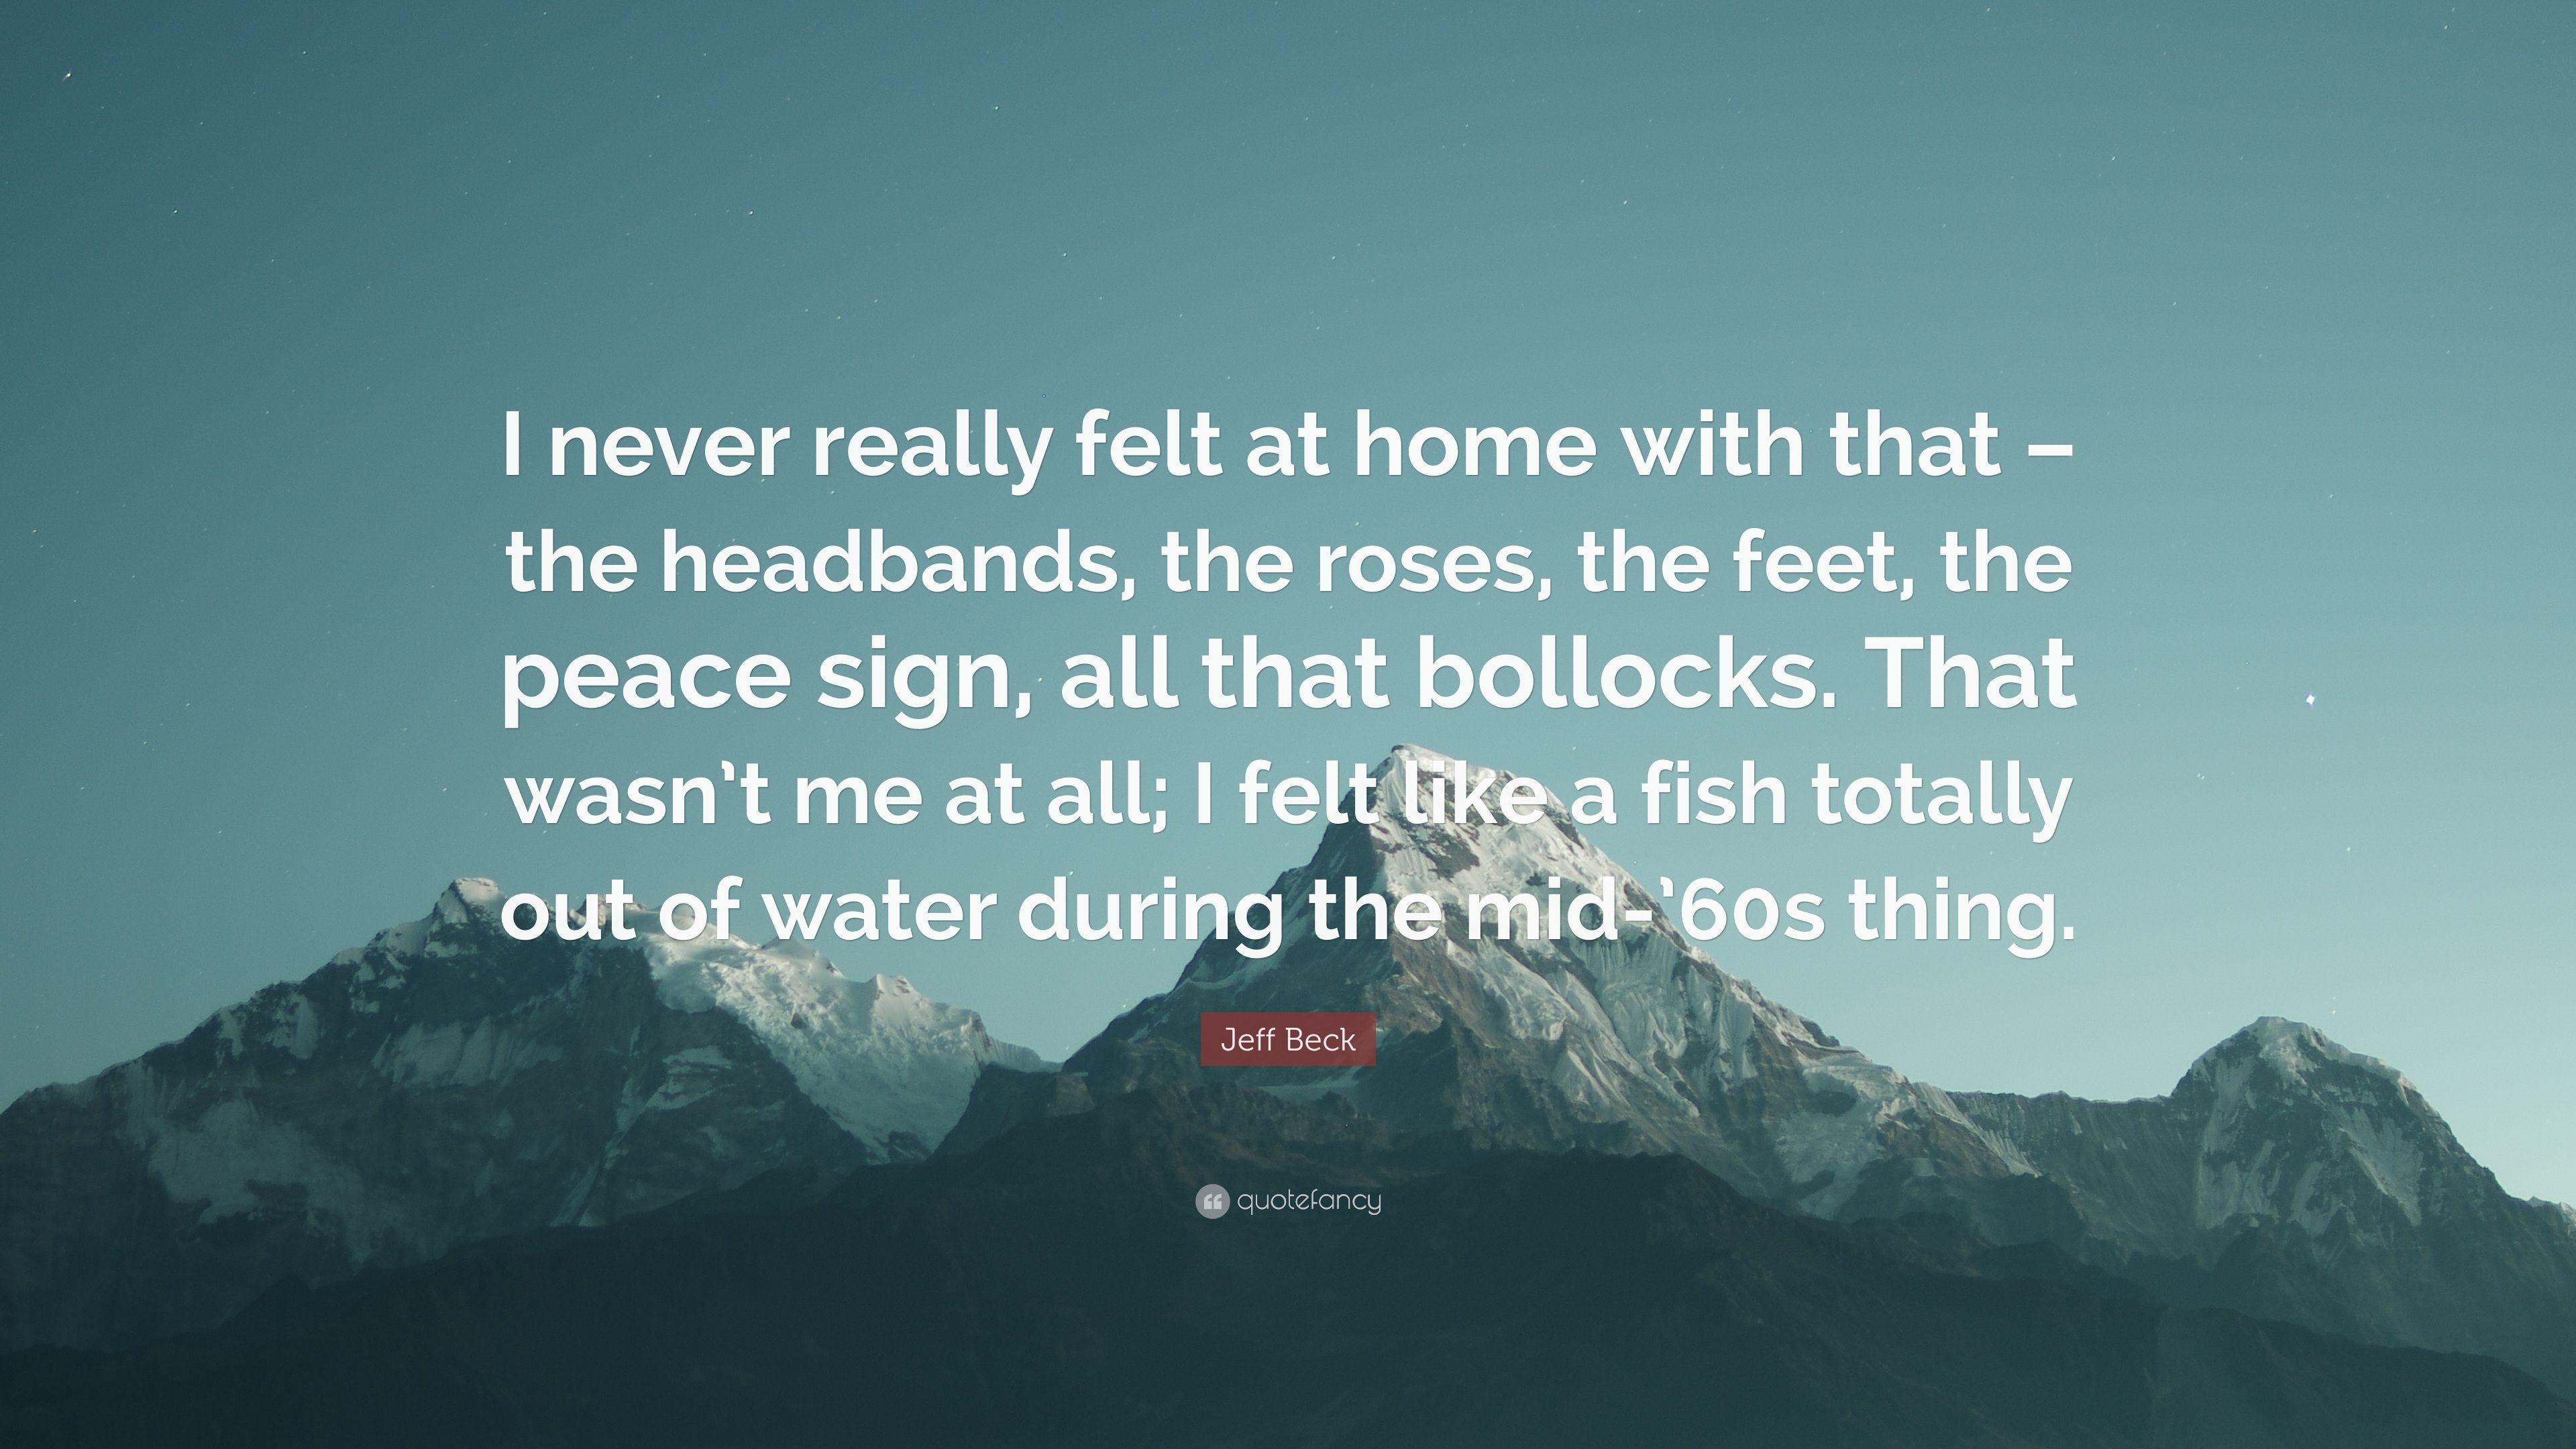 Jeff Beck Quote: “I never really felt at home with that